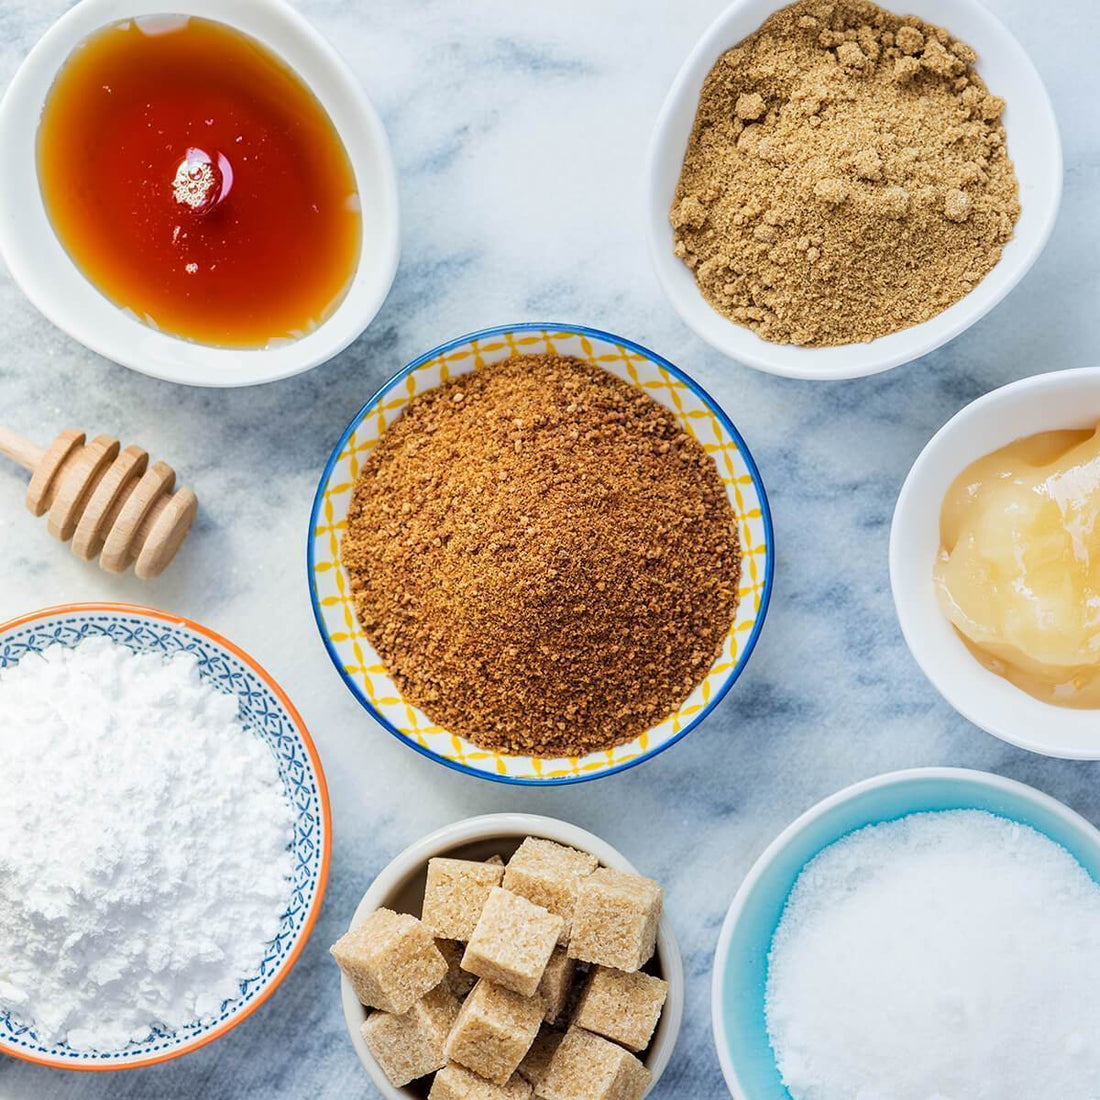 5 Tips for Cutting Down on Sugar